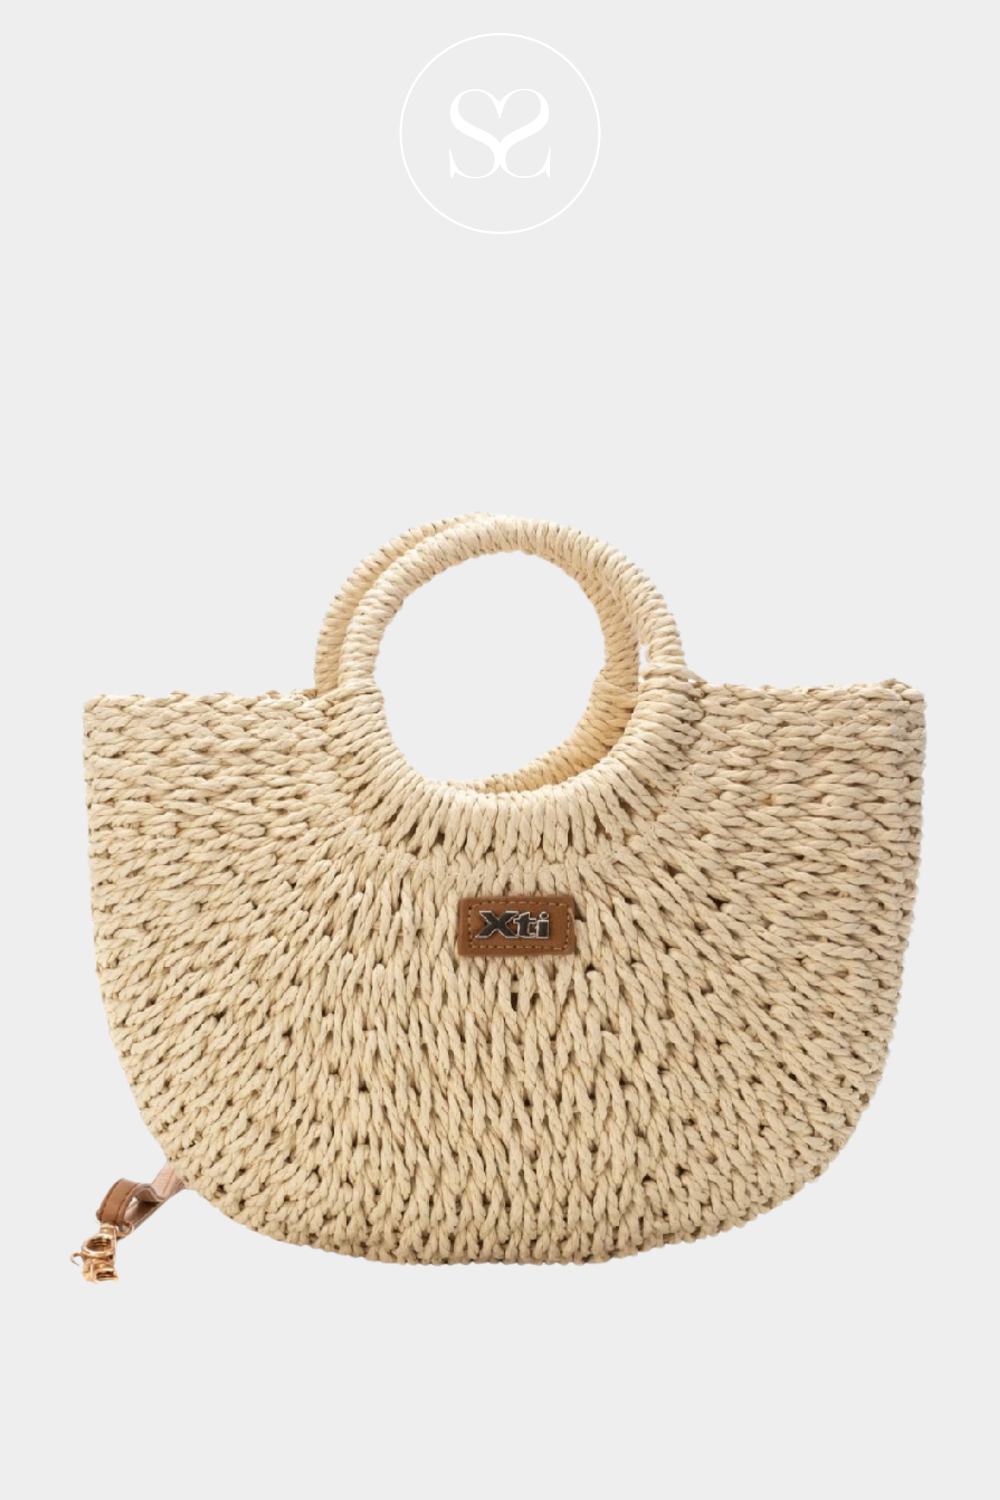 XTI 184286 CREAM RAFTAN BEACH TOTE WITH ROUND HANDLES, COMES WITH ADDITIONAL THIN LEATHER STRAP